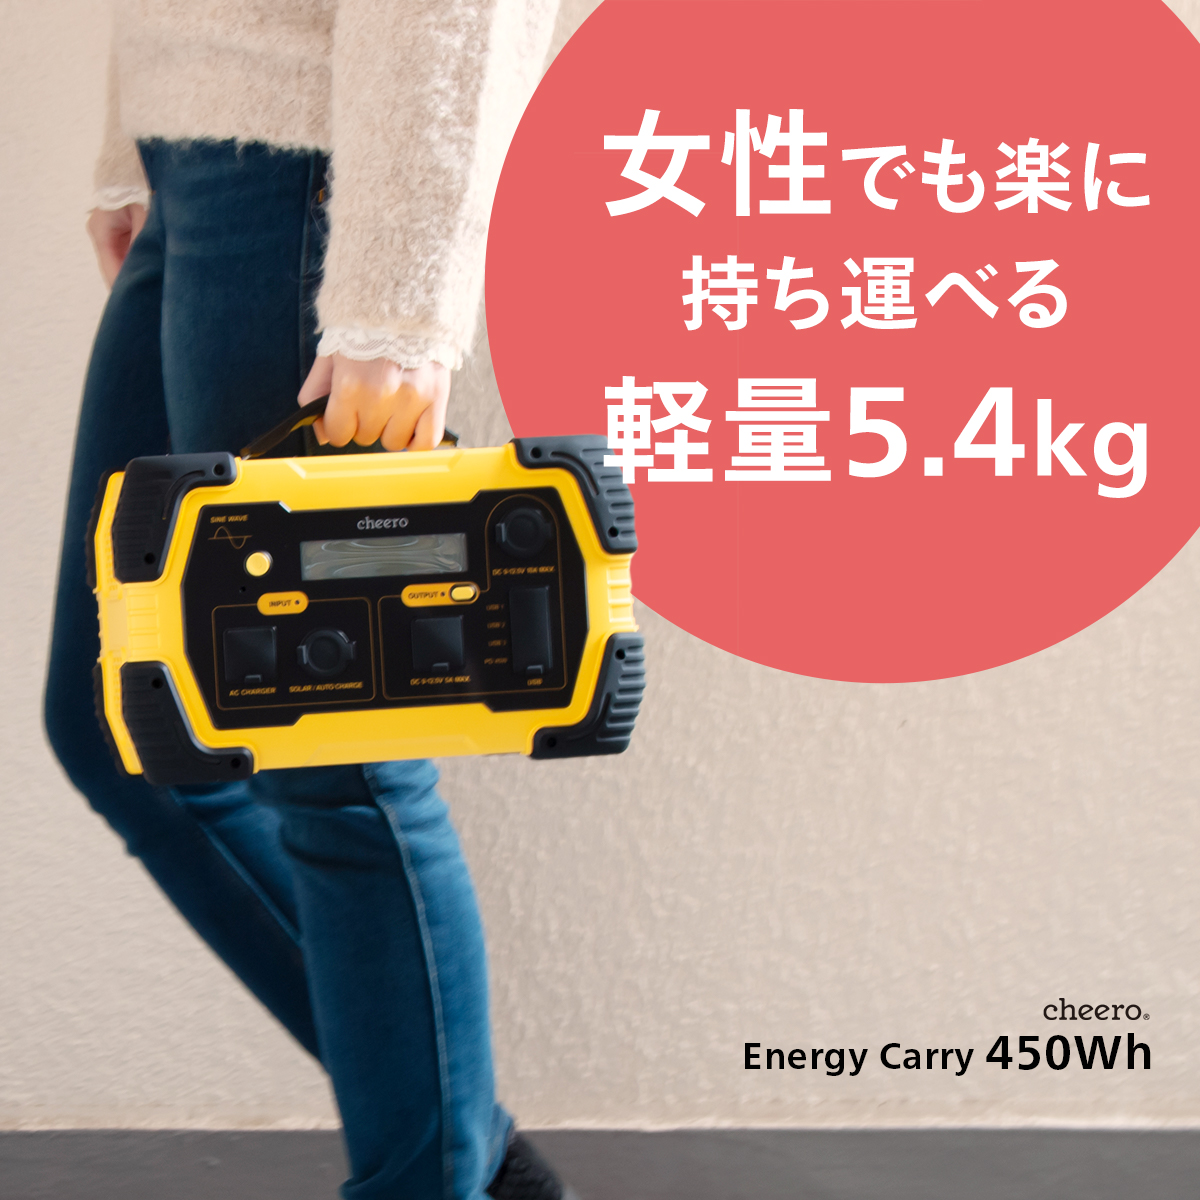 OTHER cheero Energy Carry 450Wh